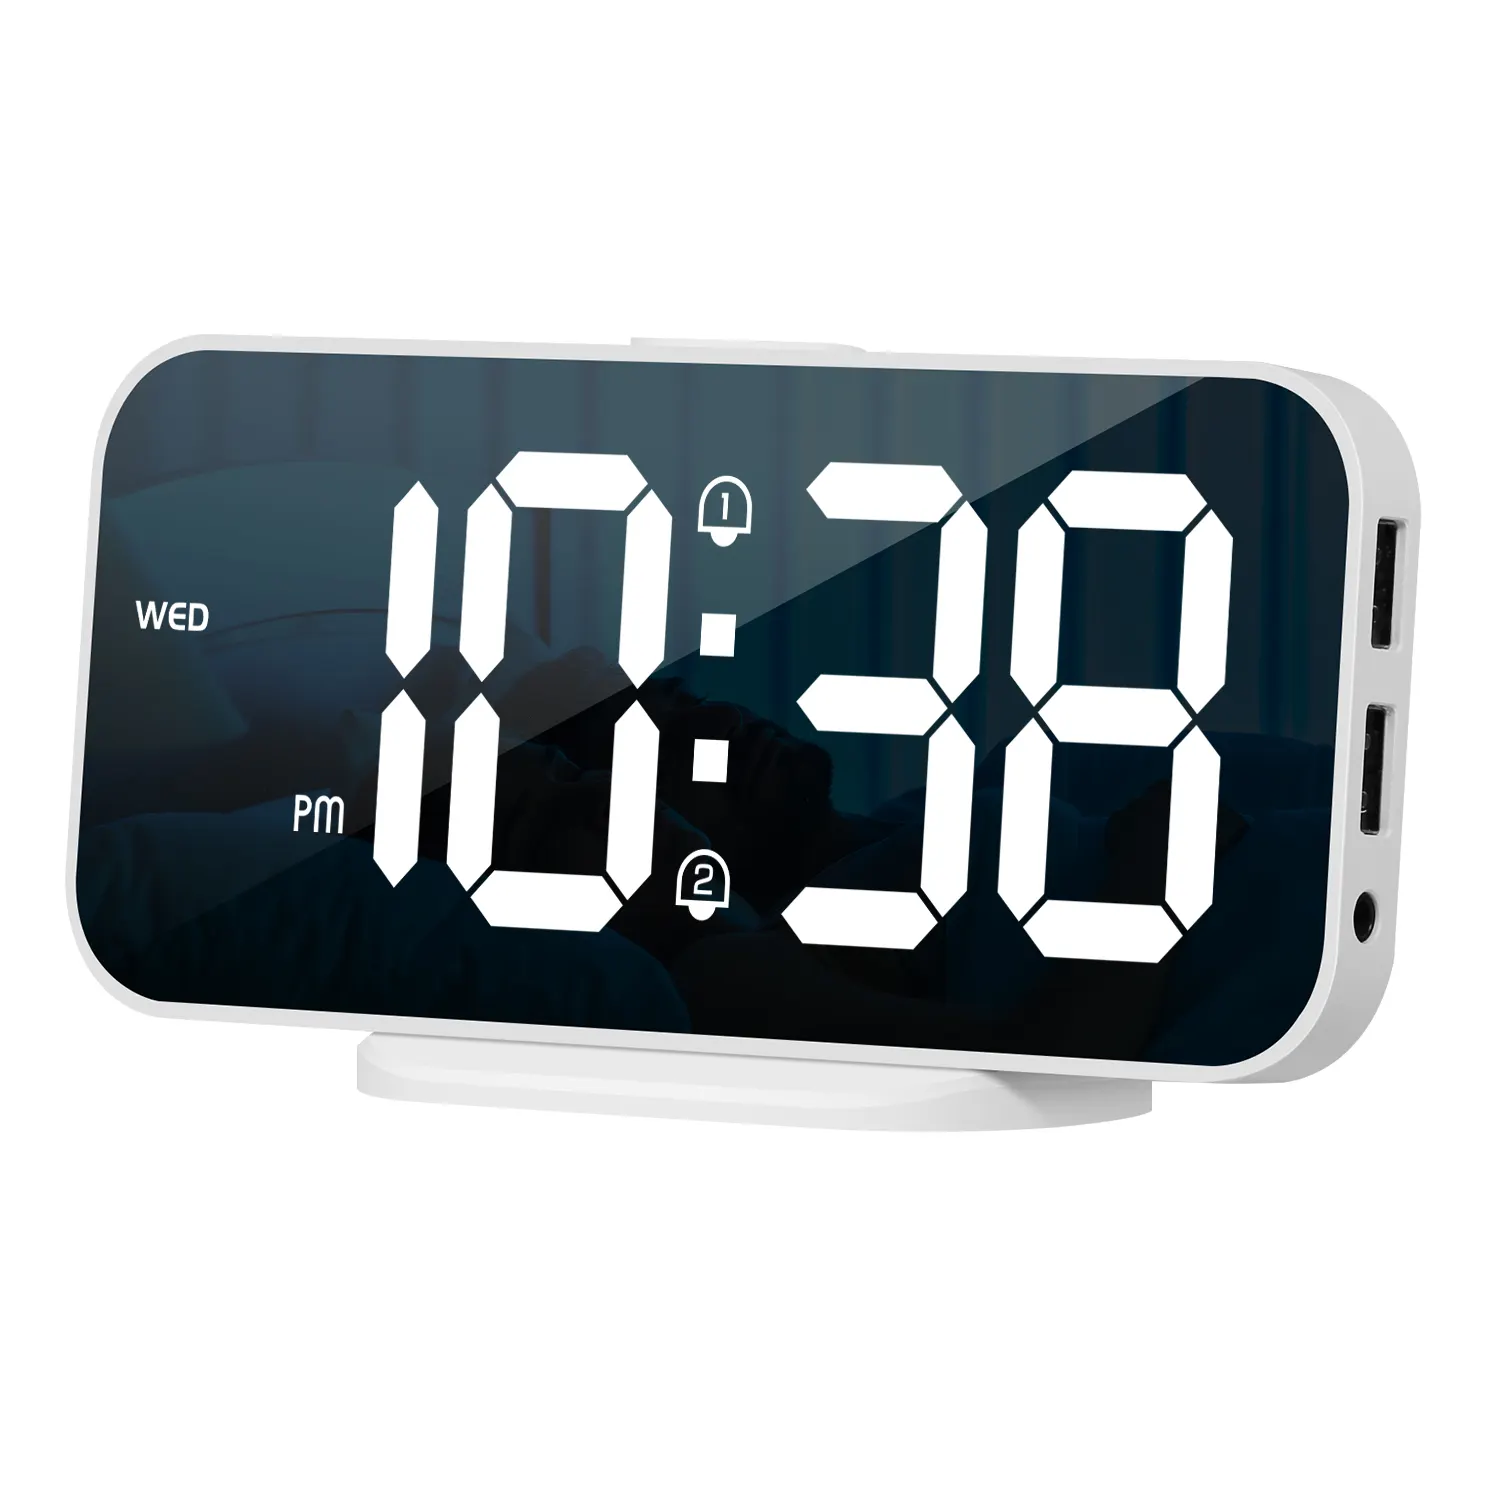 Modern Decoration Digital Clock Large LED Display Electric Alarm Clocks Mirror Surface for Makeup with Dimmer and Dual USB Ports